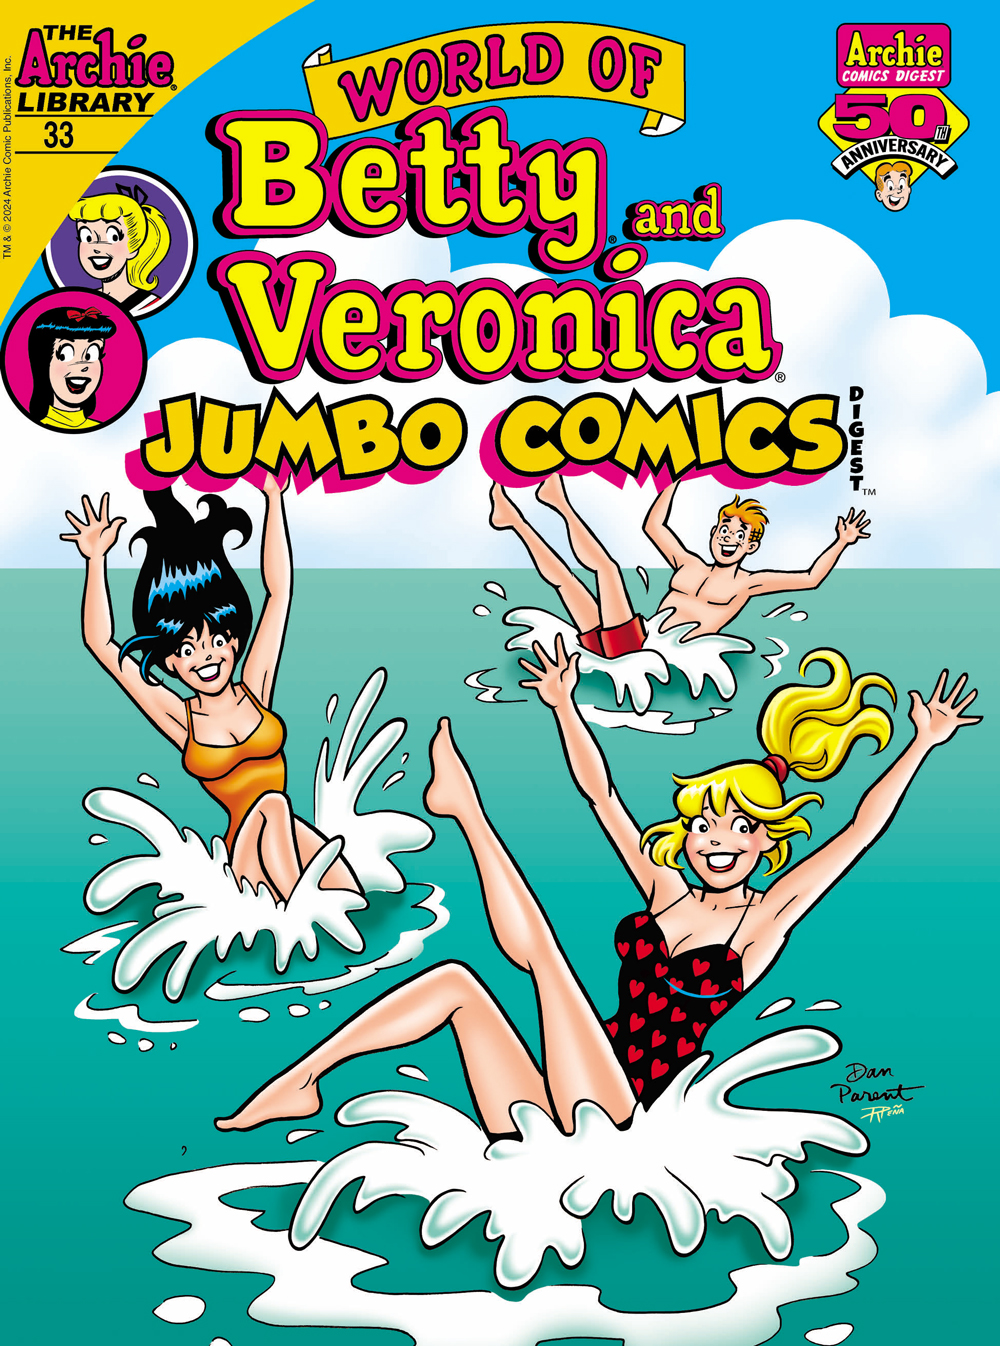 Betty, Veronica, and Archie, all wearing swimsuits, cannonball into the ocean, making splashes. They're all smiling at the reader.